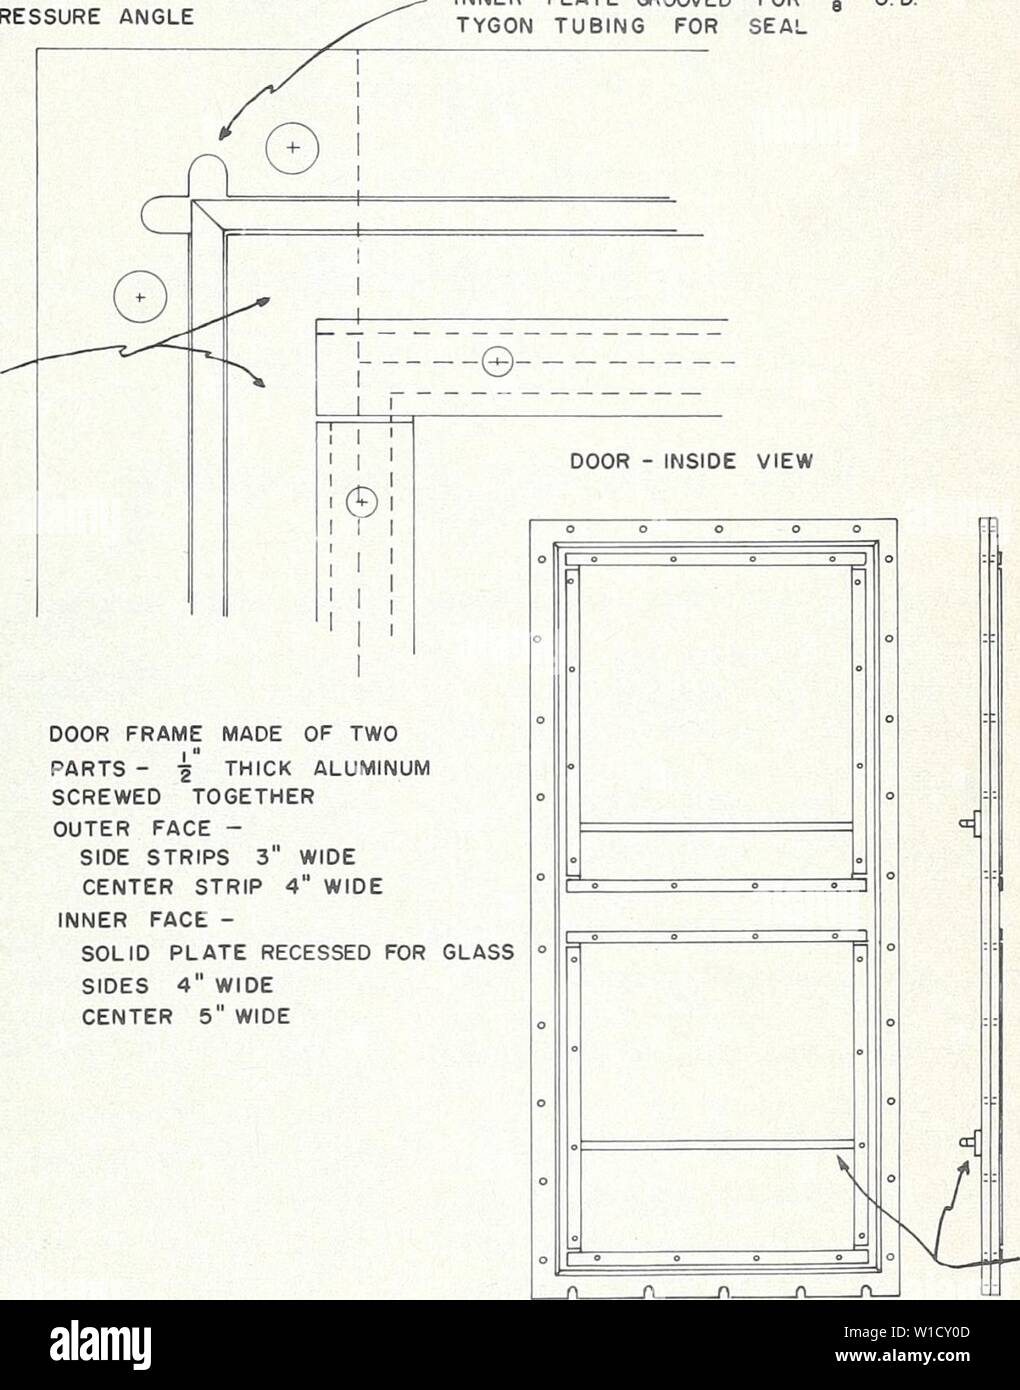 Archive image from page 8 of Design and operation of a. Design and operation of a carbon-14 biosynthesis chamber . designoperationo911smit Year: 1962  ///////A â] TYGON TUBING BOLT HEADS WELDED TO DOOR FRAME 10 BOLTS ON EACH SIDE 5 ON TOP AND BOTTOM SPACING â 2' FROM CORNERS 6-Jr' APART SPACER BAR â Â§' THICK BY l' WIDE BETWEEN DOOR FRAME ANGLE AND PRESSURE ANGLE RUNS LENGTH OF PRESSURE ANGLE INNER PLATE GROOVED FOR ' 0. D. TYGON TUBING FOR SEAL WHEN SEALING DOOR CALKING COMPOUND IS PLACED AROUND FRAME BETWEEN TYGON TUBING AND PRESSURE ANGLES SUPPORTING GLASS    SCREWED TOGETHER OUTER FACE - Stock Photo